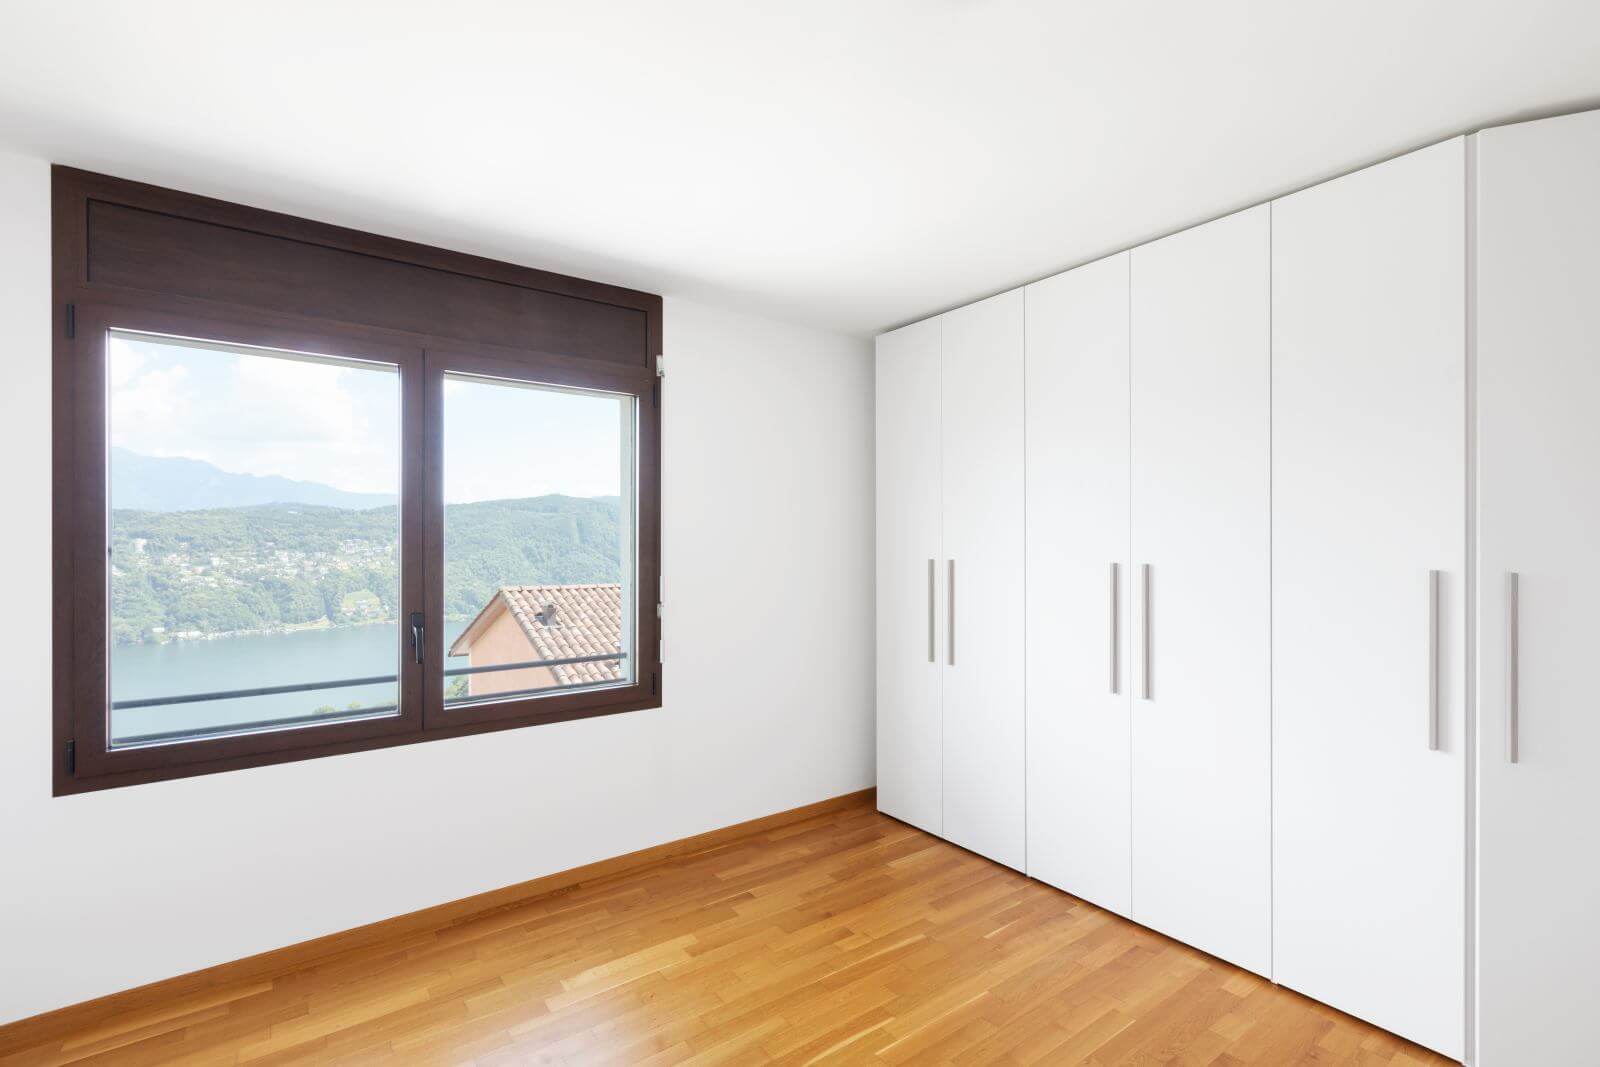 White empty room with windows overlooking the lake and large white wardrobe. Nobody inside